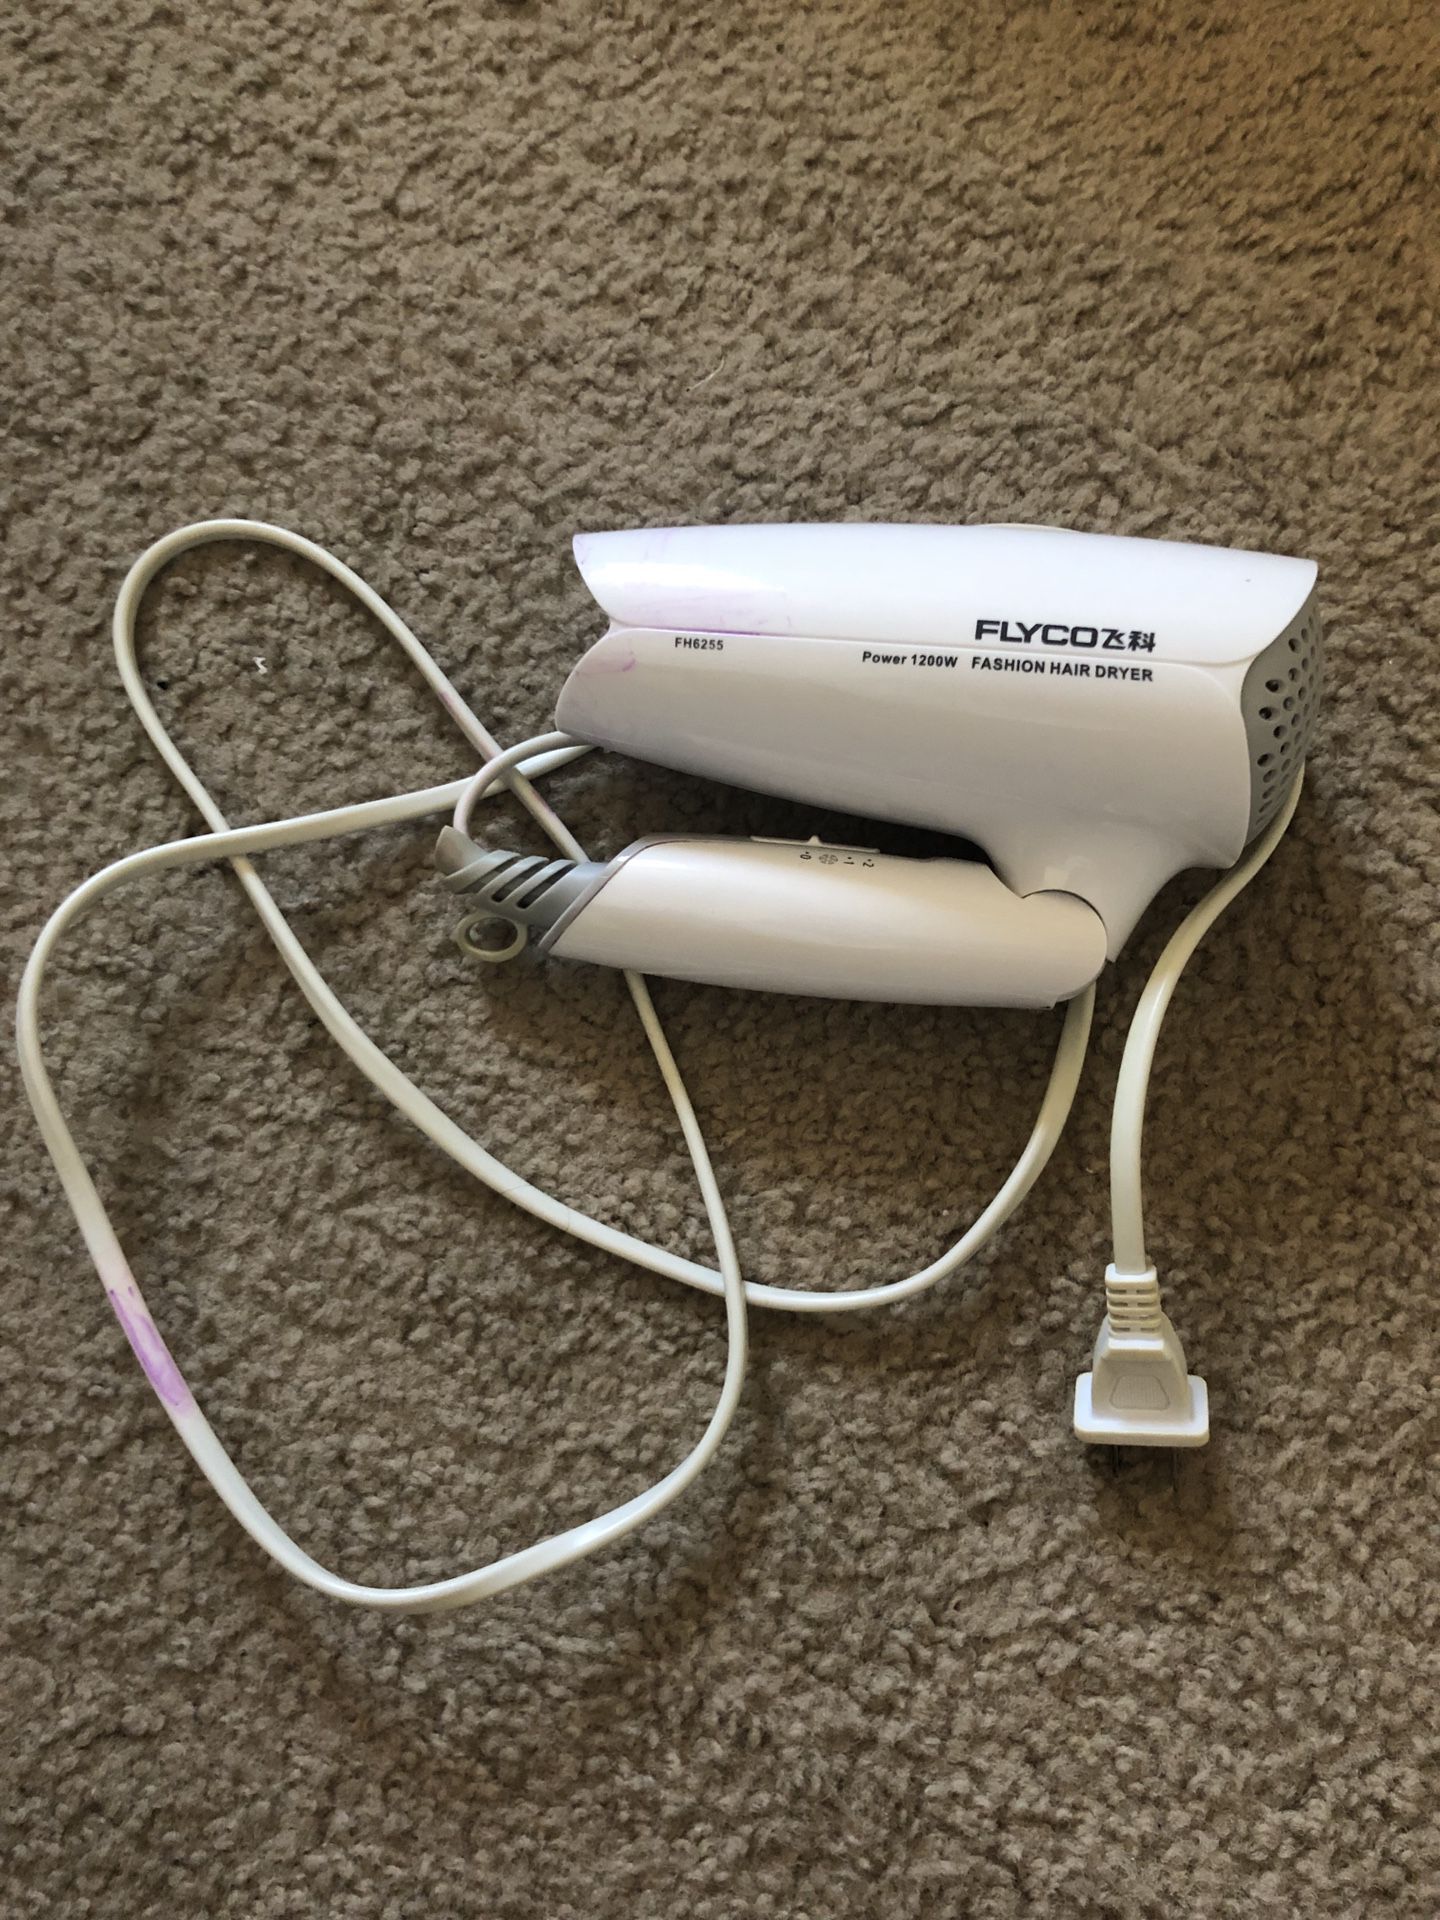 Small Hair Dryer in good condition